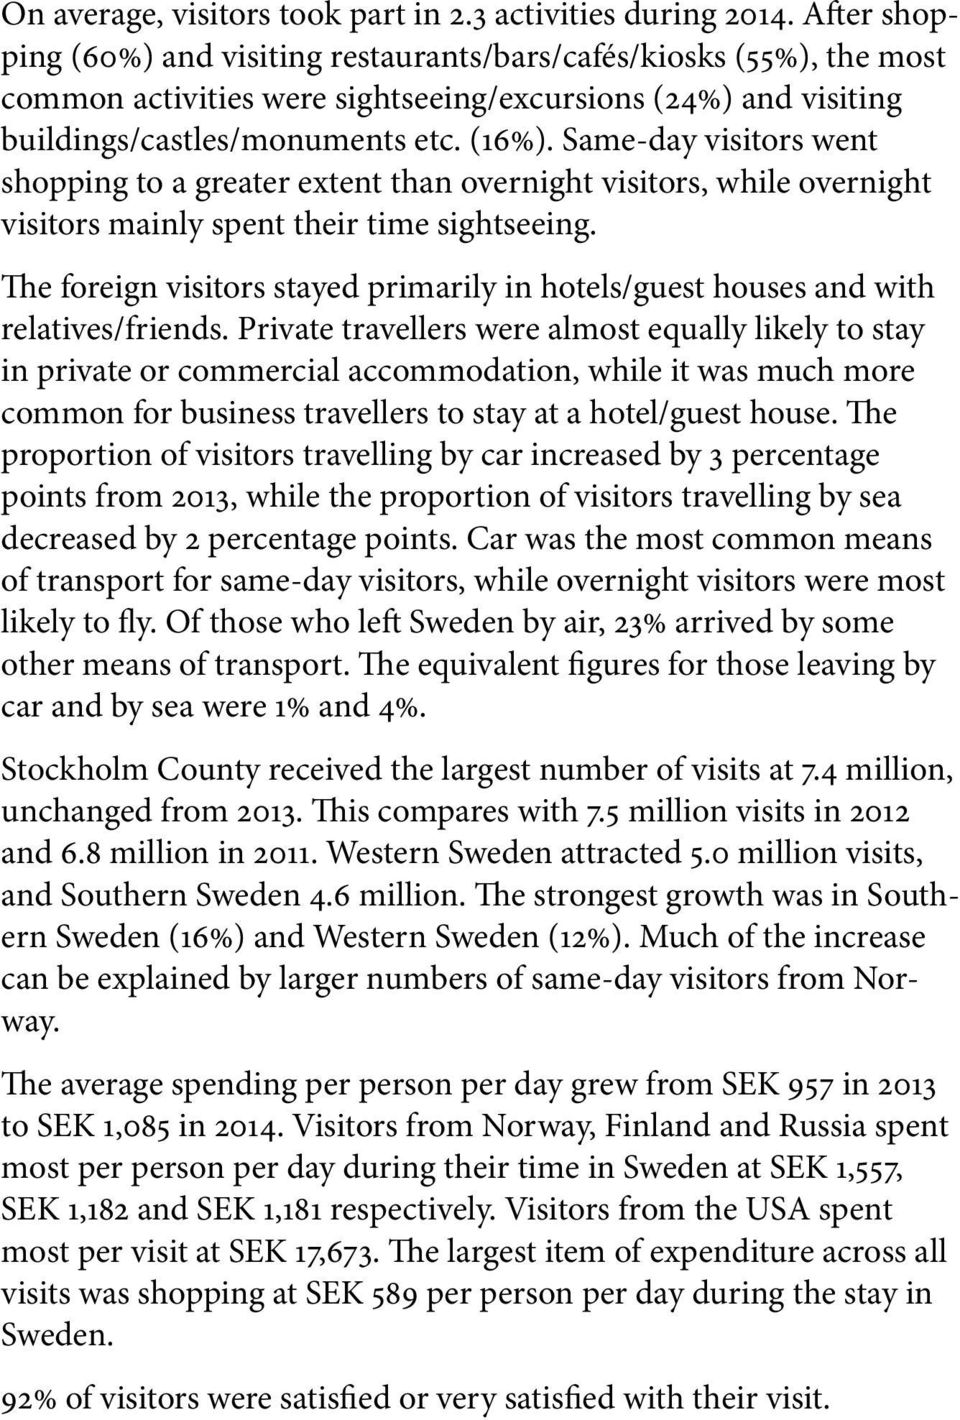 Same-day visitors went shopping to a greater extent than overnight visitors, while overnight visitors mainly spent their time sightseeing.